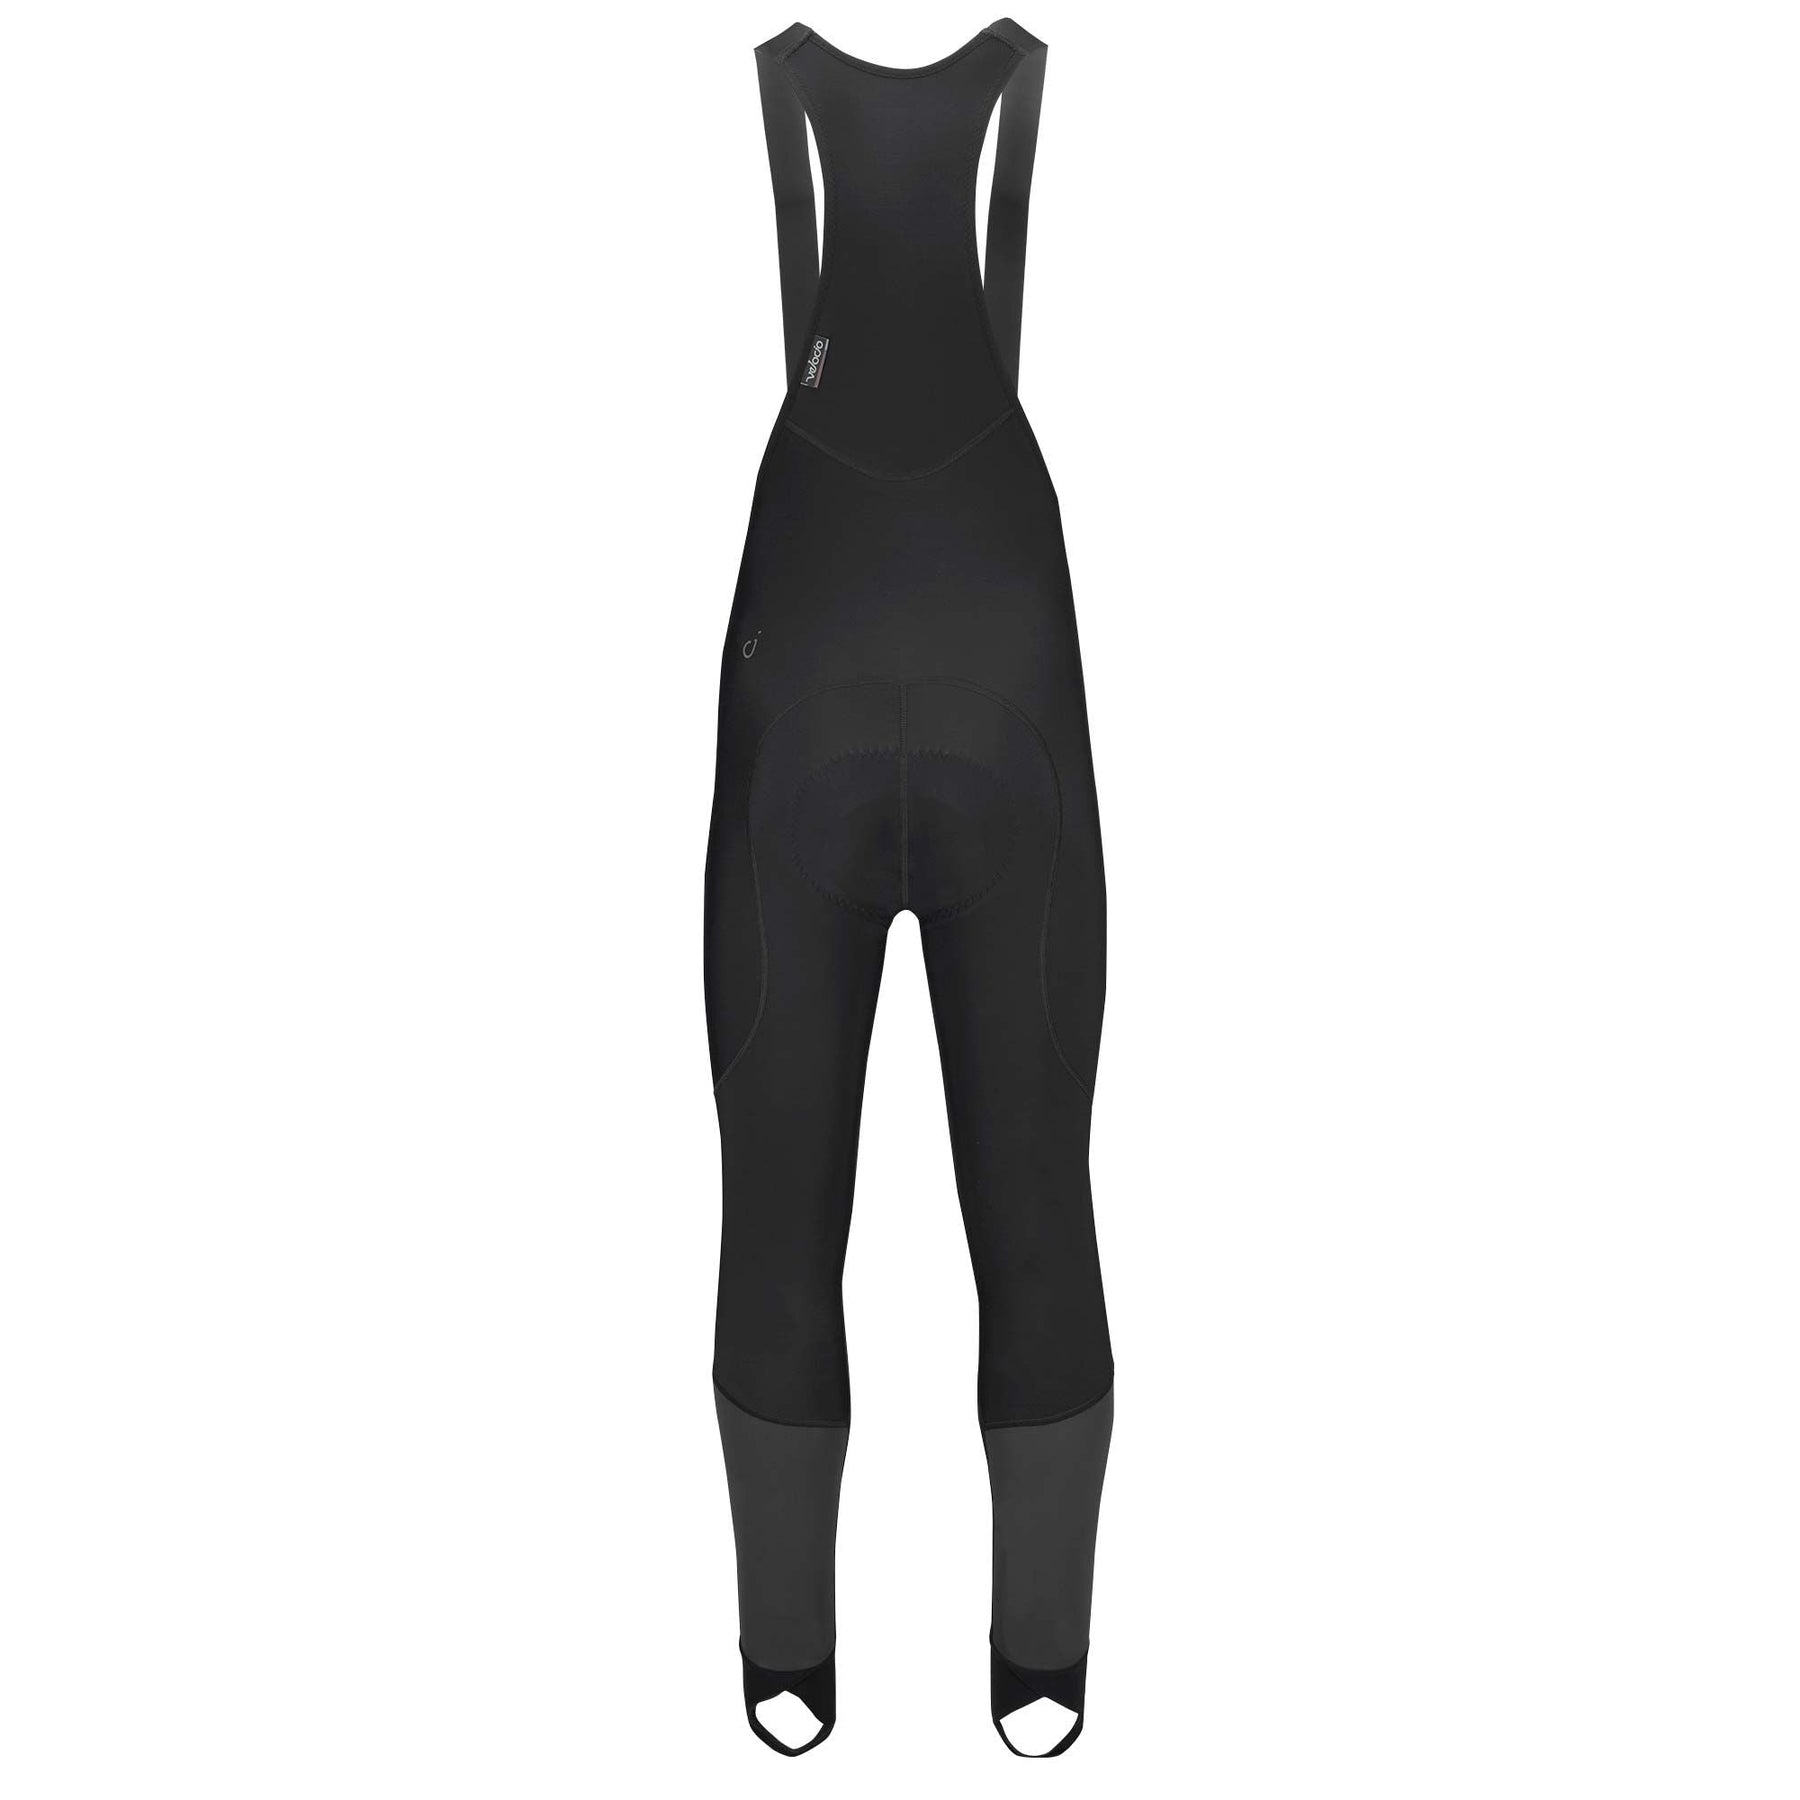 Black Compression mens cycling tights sale